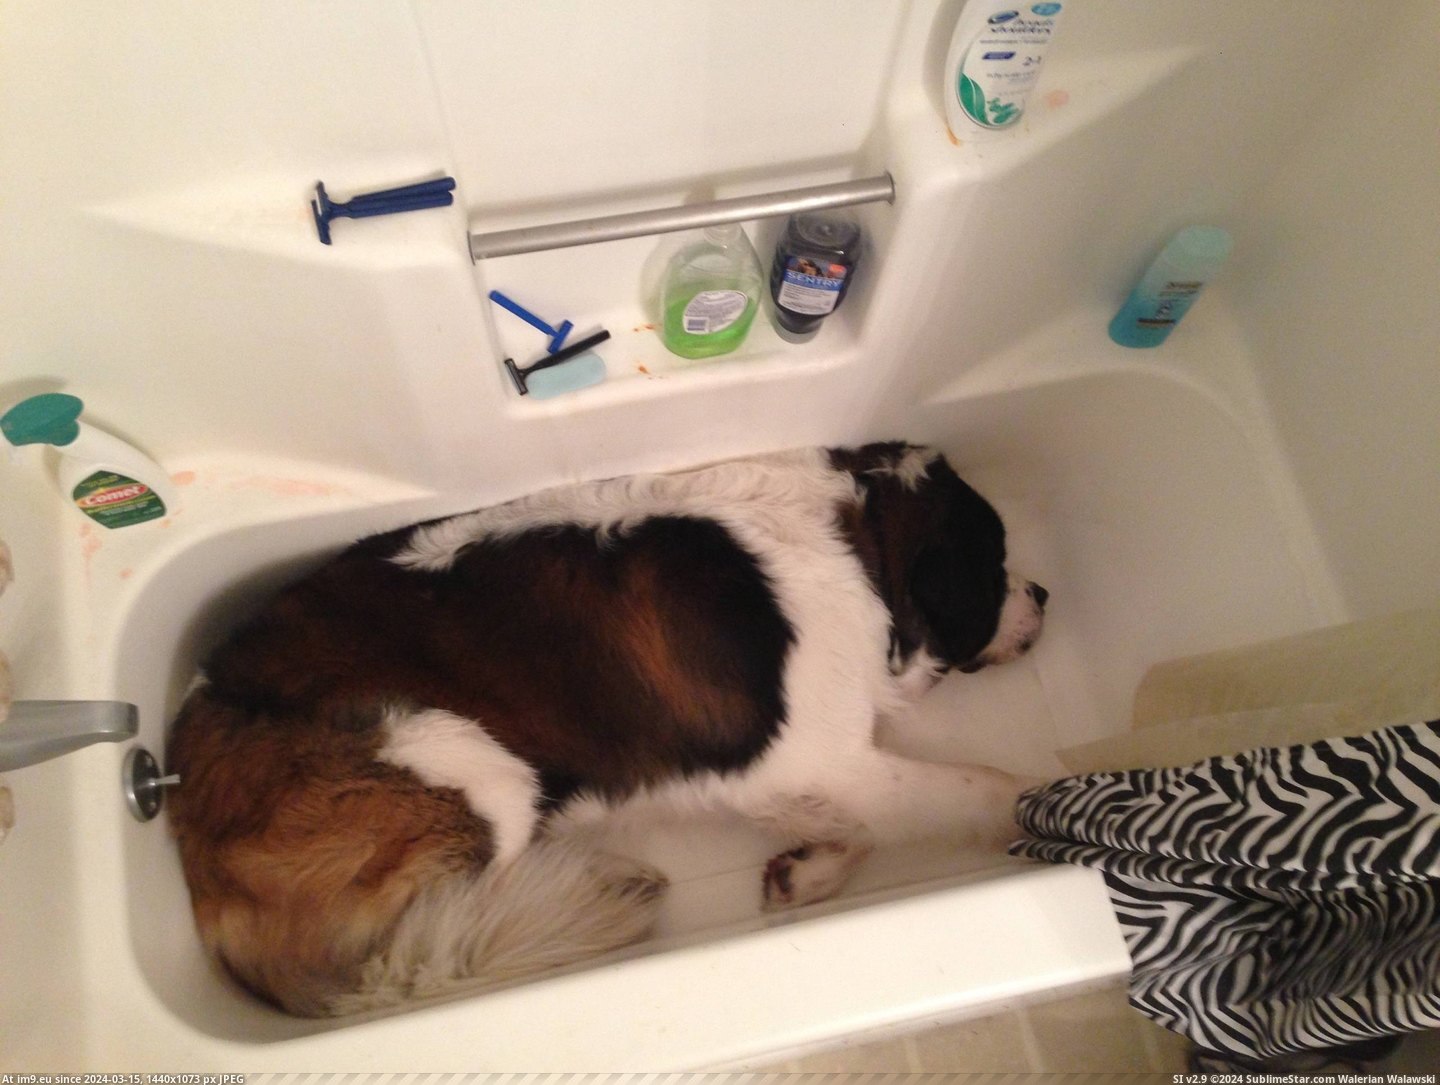 #Funny #Had #Him #Counter #Habit #Jub #Weirdo #Caught #Laying #Realize [Funny] After I caught him on the counter, I started to realize Jub Jub has always had a habit of laying down like a weirdo. 8 Pic. (Bild von album My r/FUNNY favs))